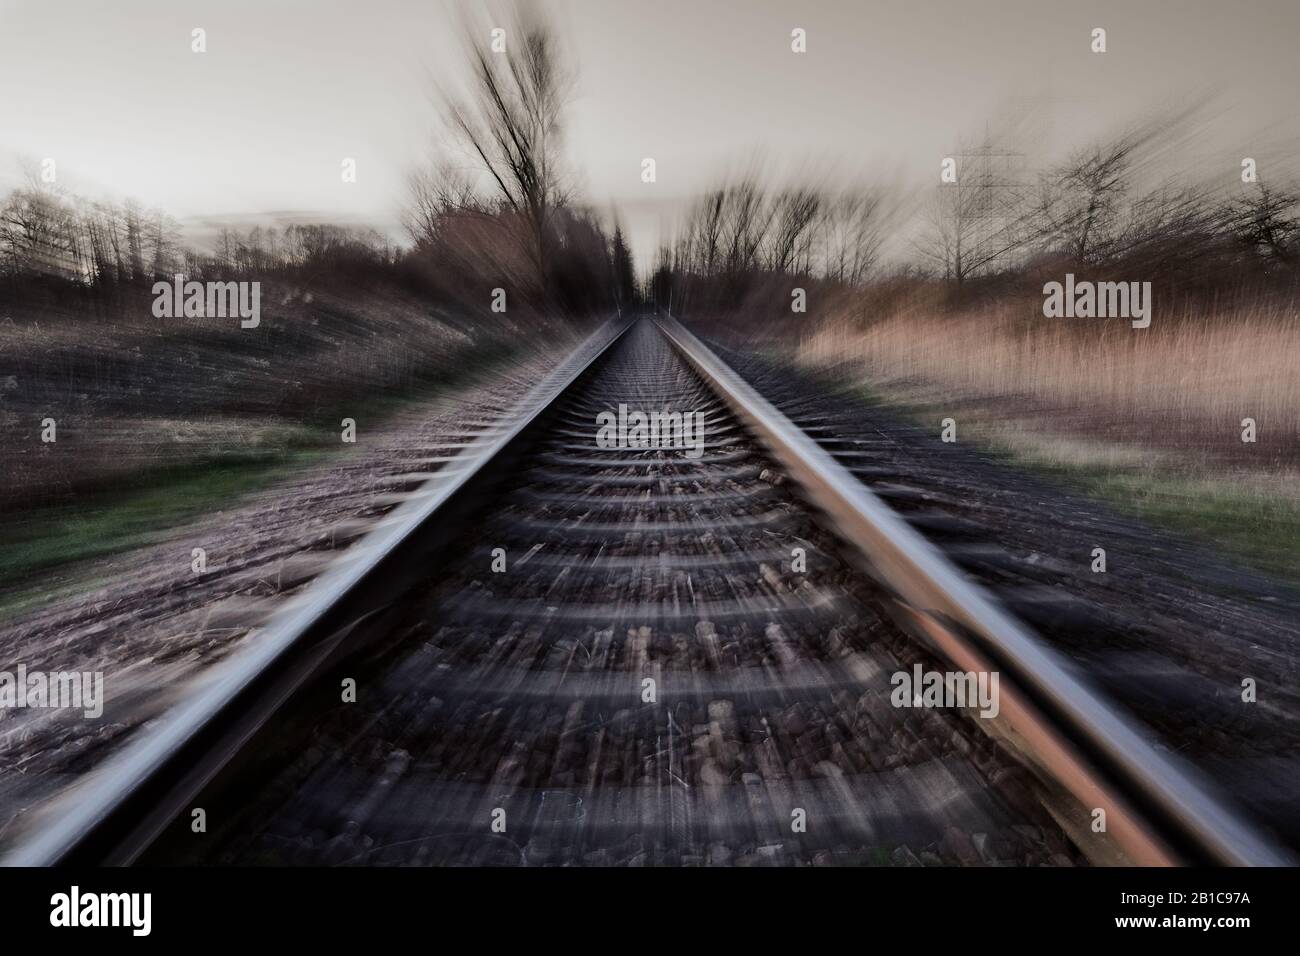 Railroad track with motion blur. High speed transportation concept and abstract nature Stock Photo